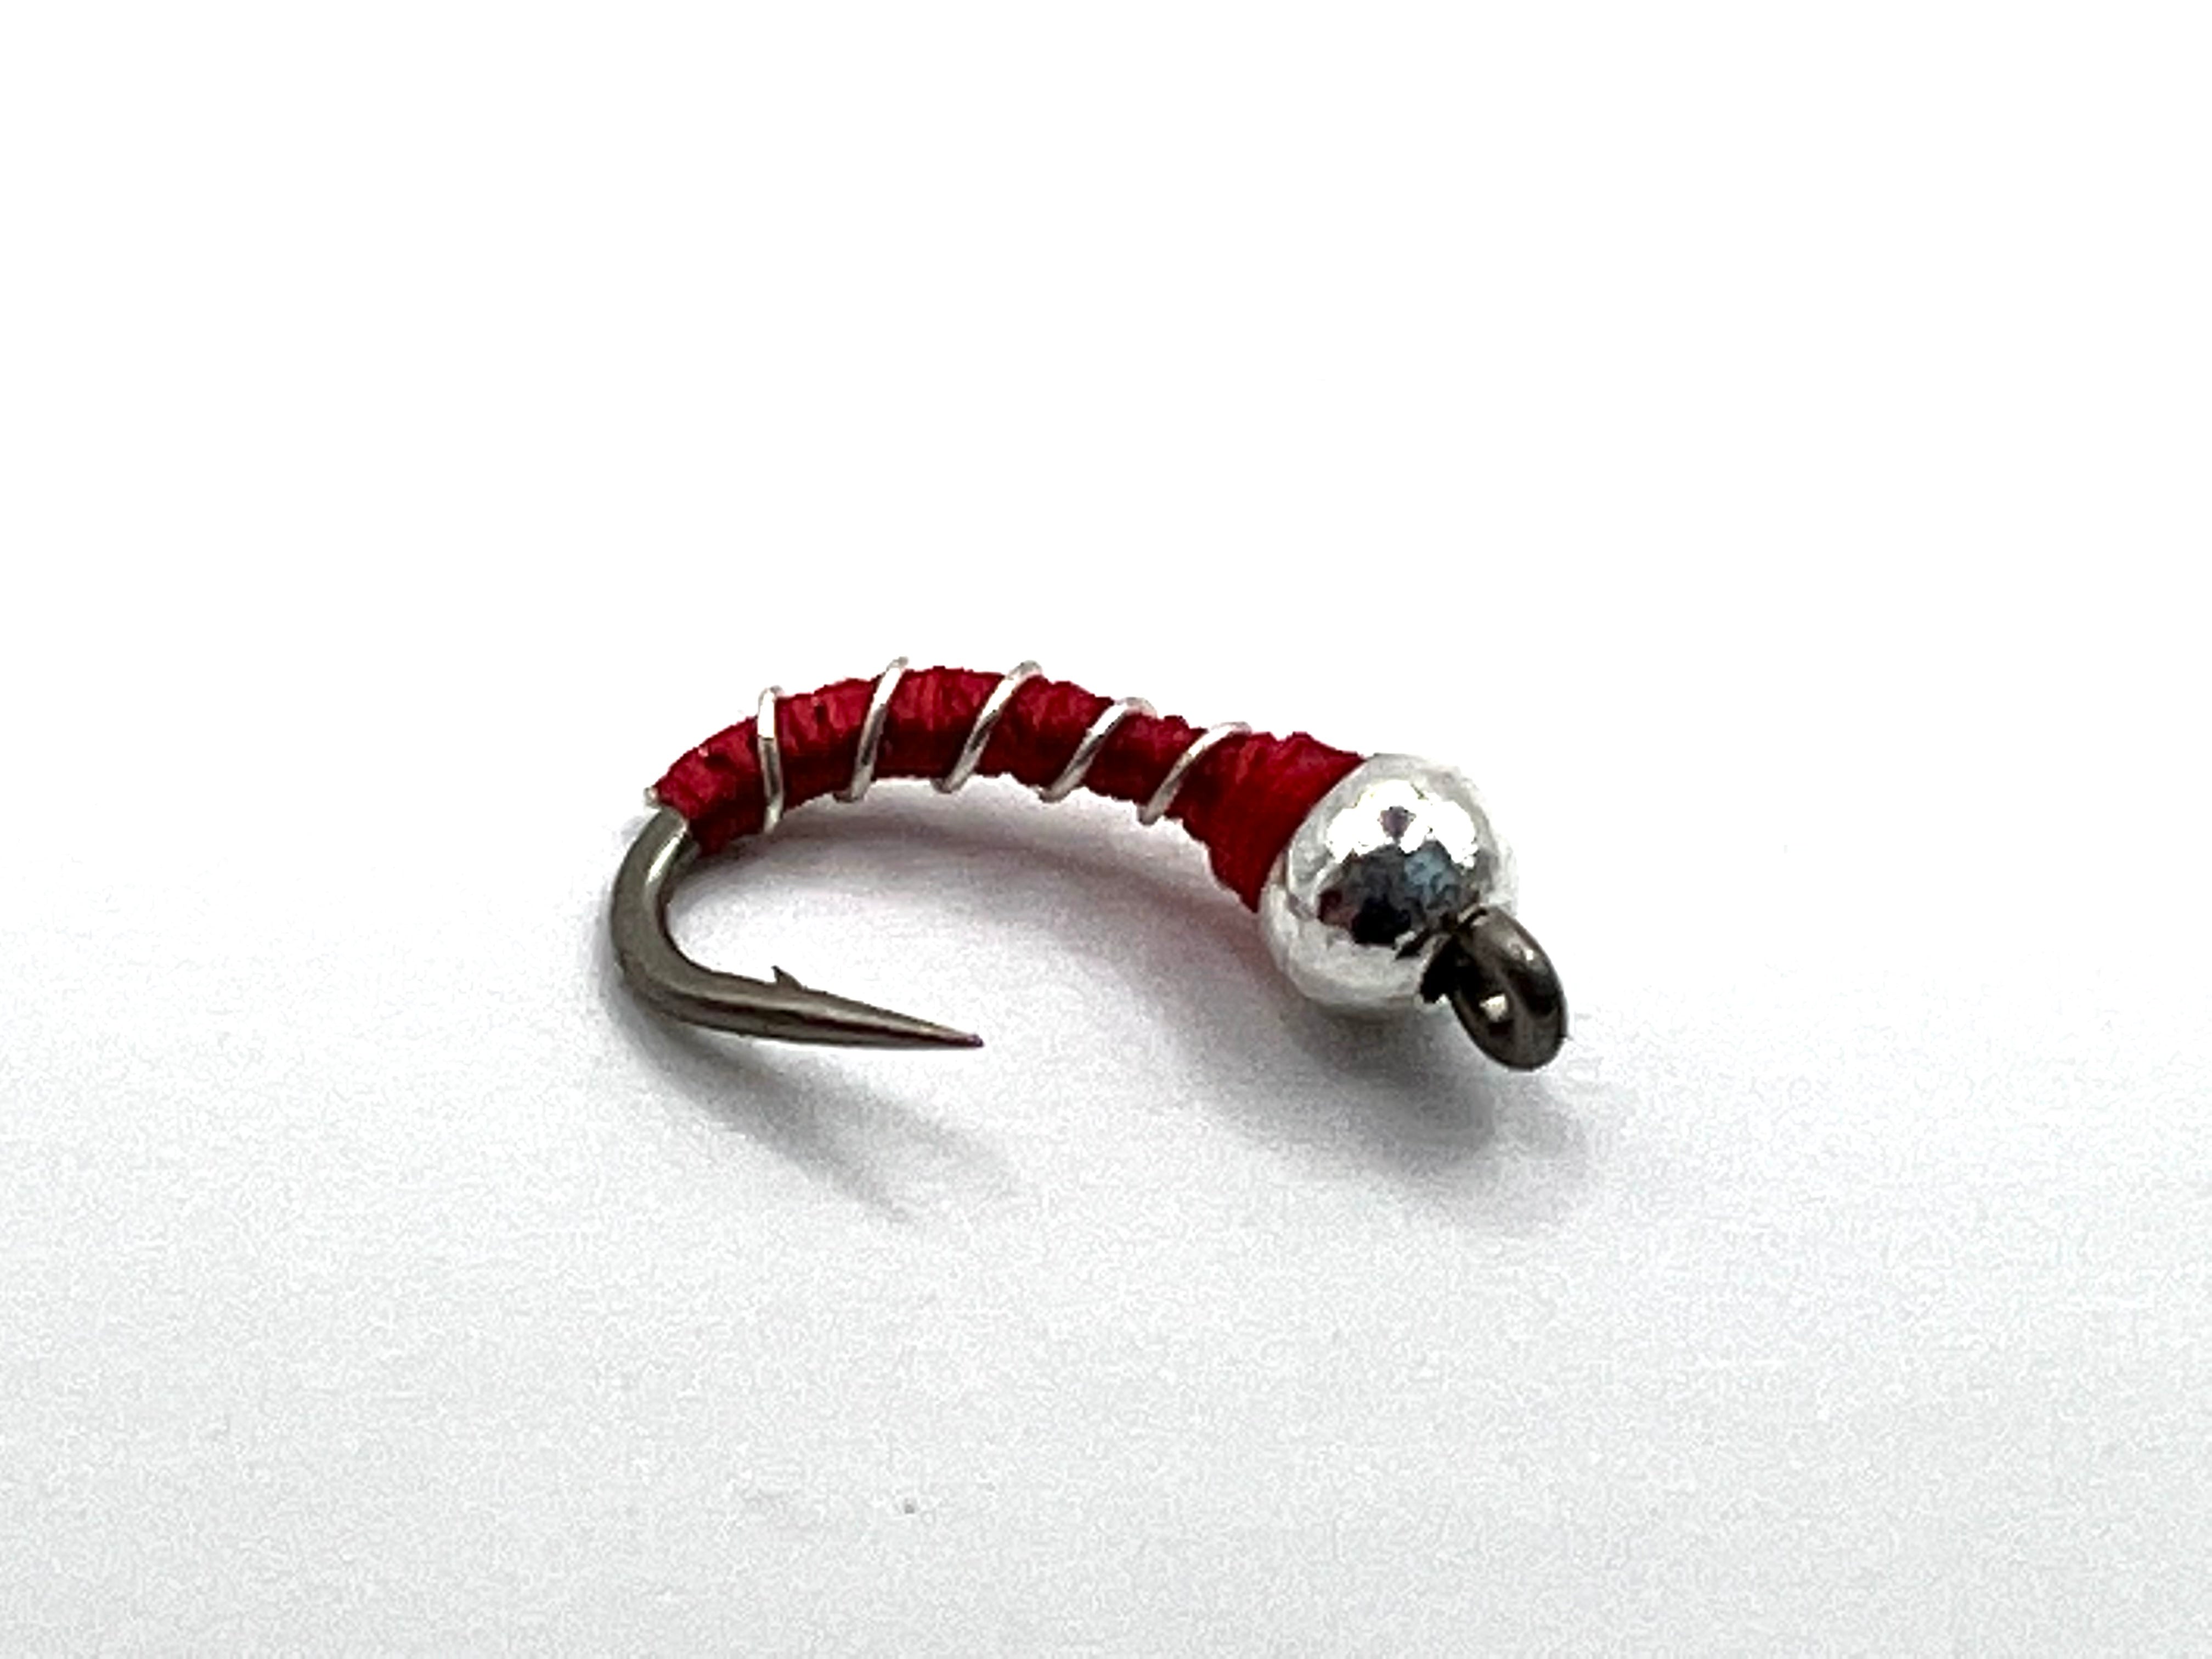 Thread Head Zebra Midge Nymph Fly, 6-Pack - Black or Red #22 / Red